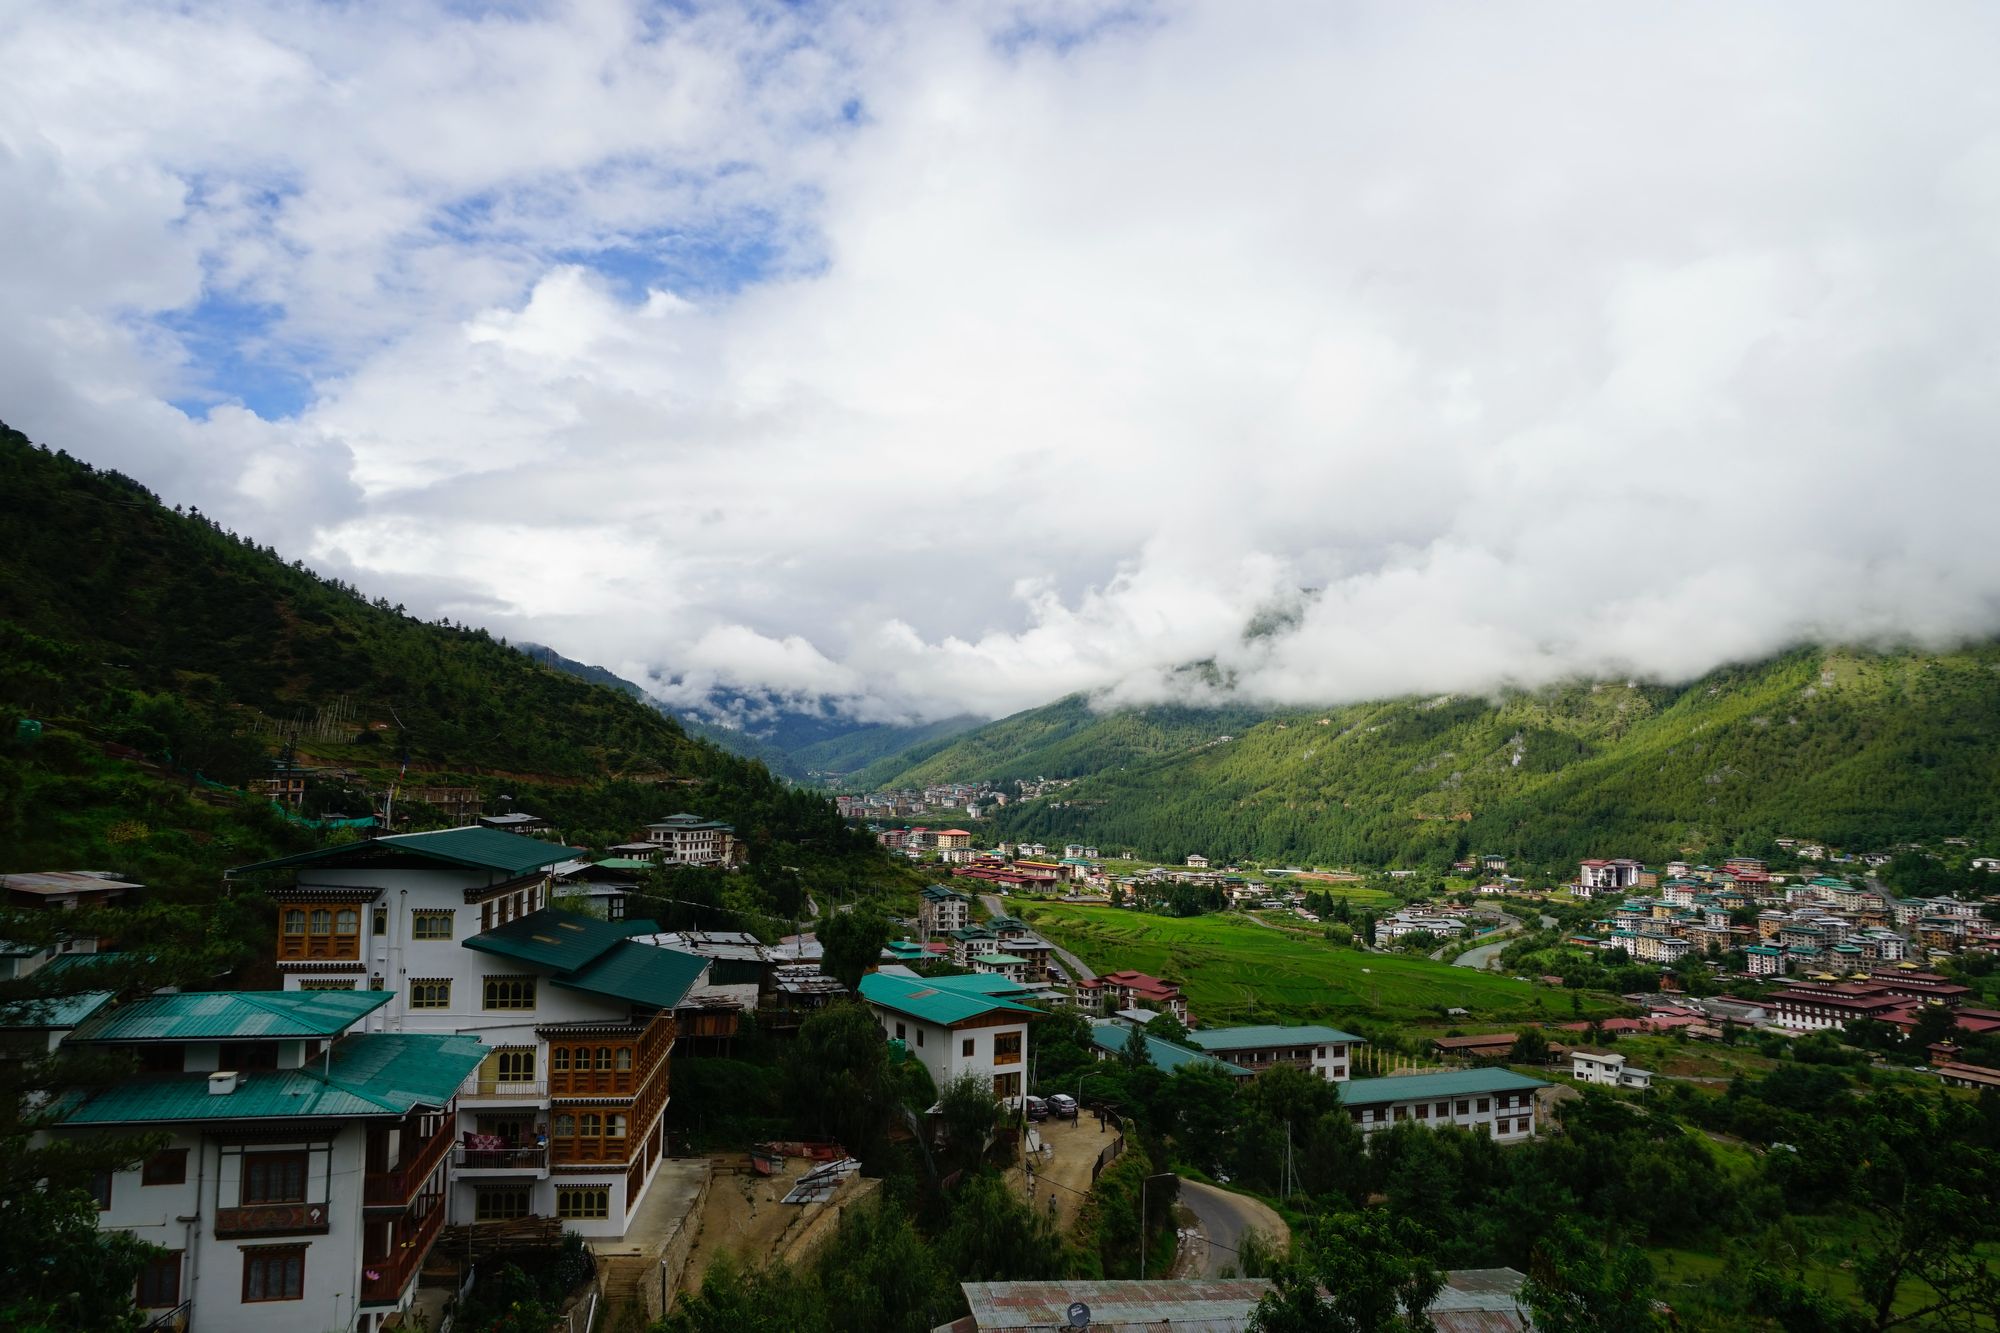 Bhutan In Talks Of Developing “Bubble Tourism” With India